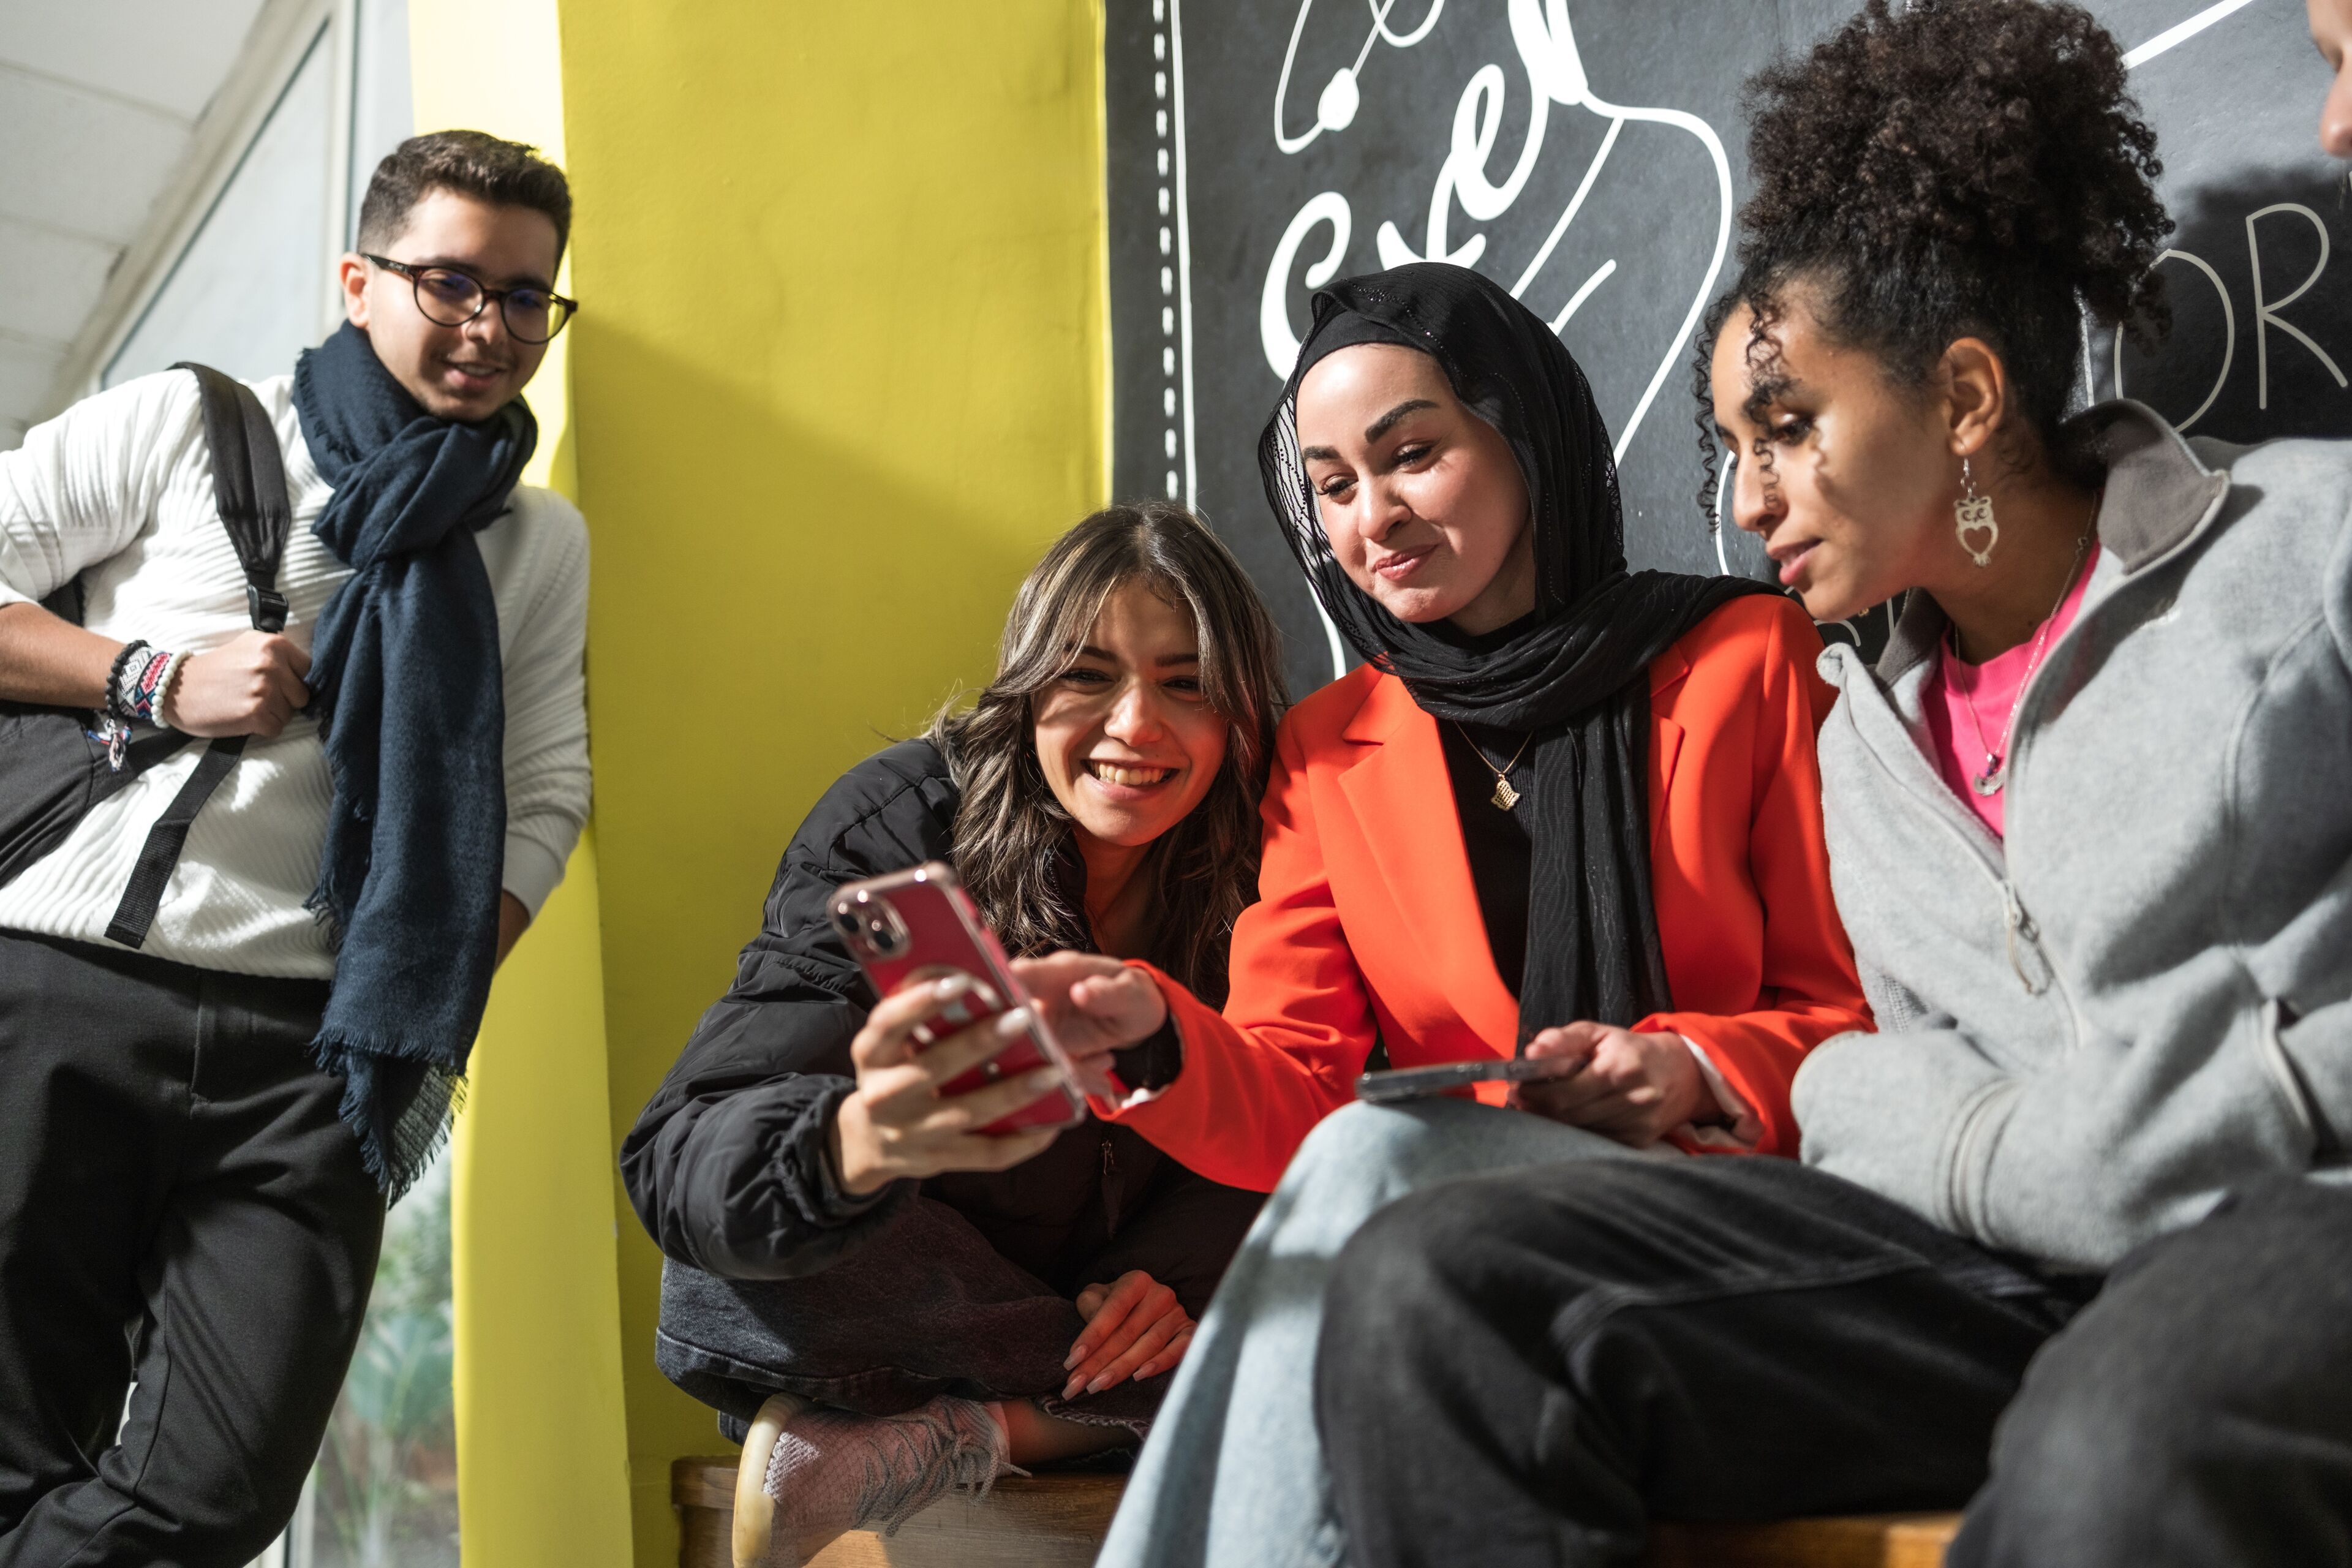 A diverse group of students sharing a joyful moment over a smartphone in a cozy campus setting